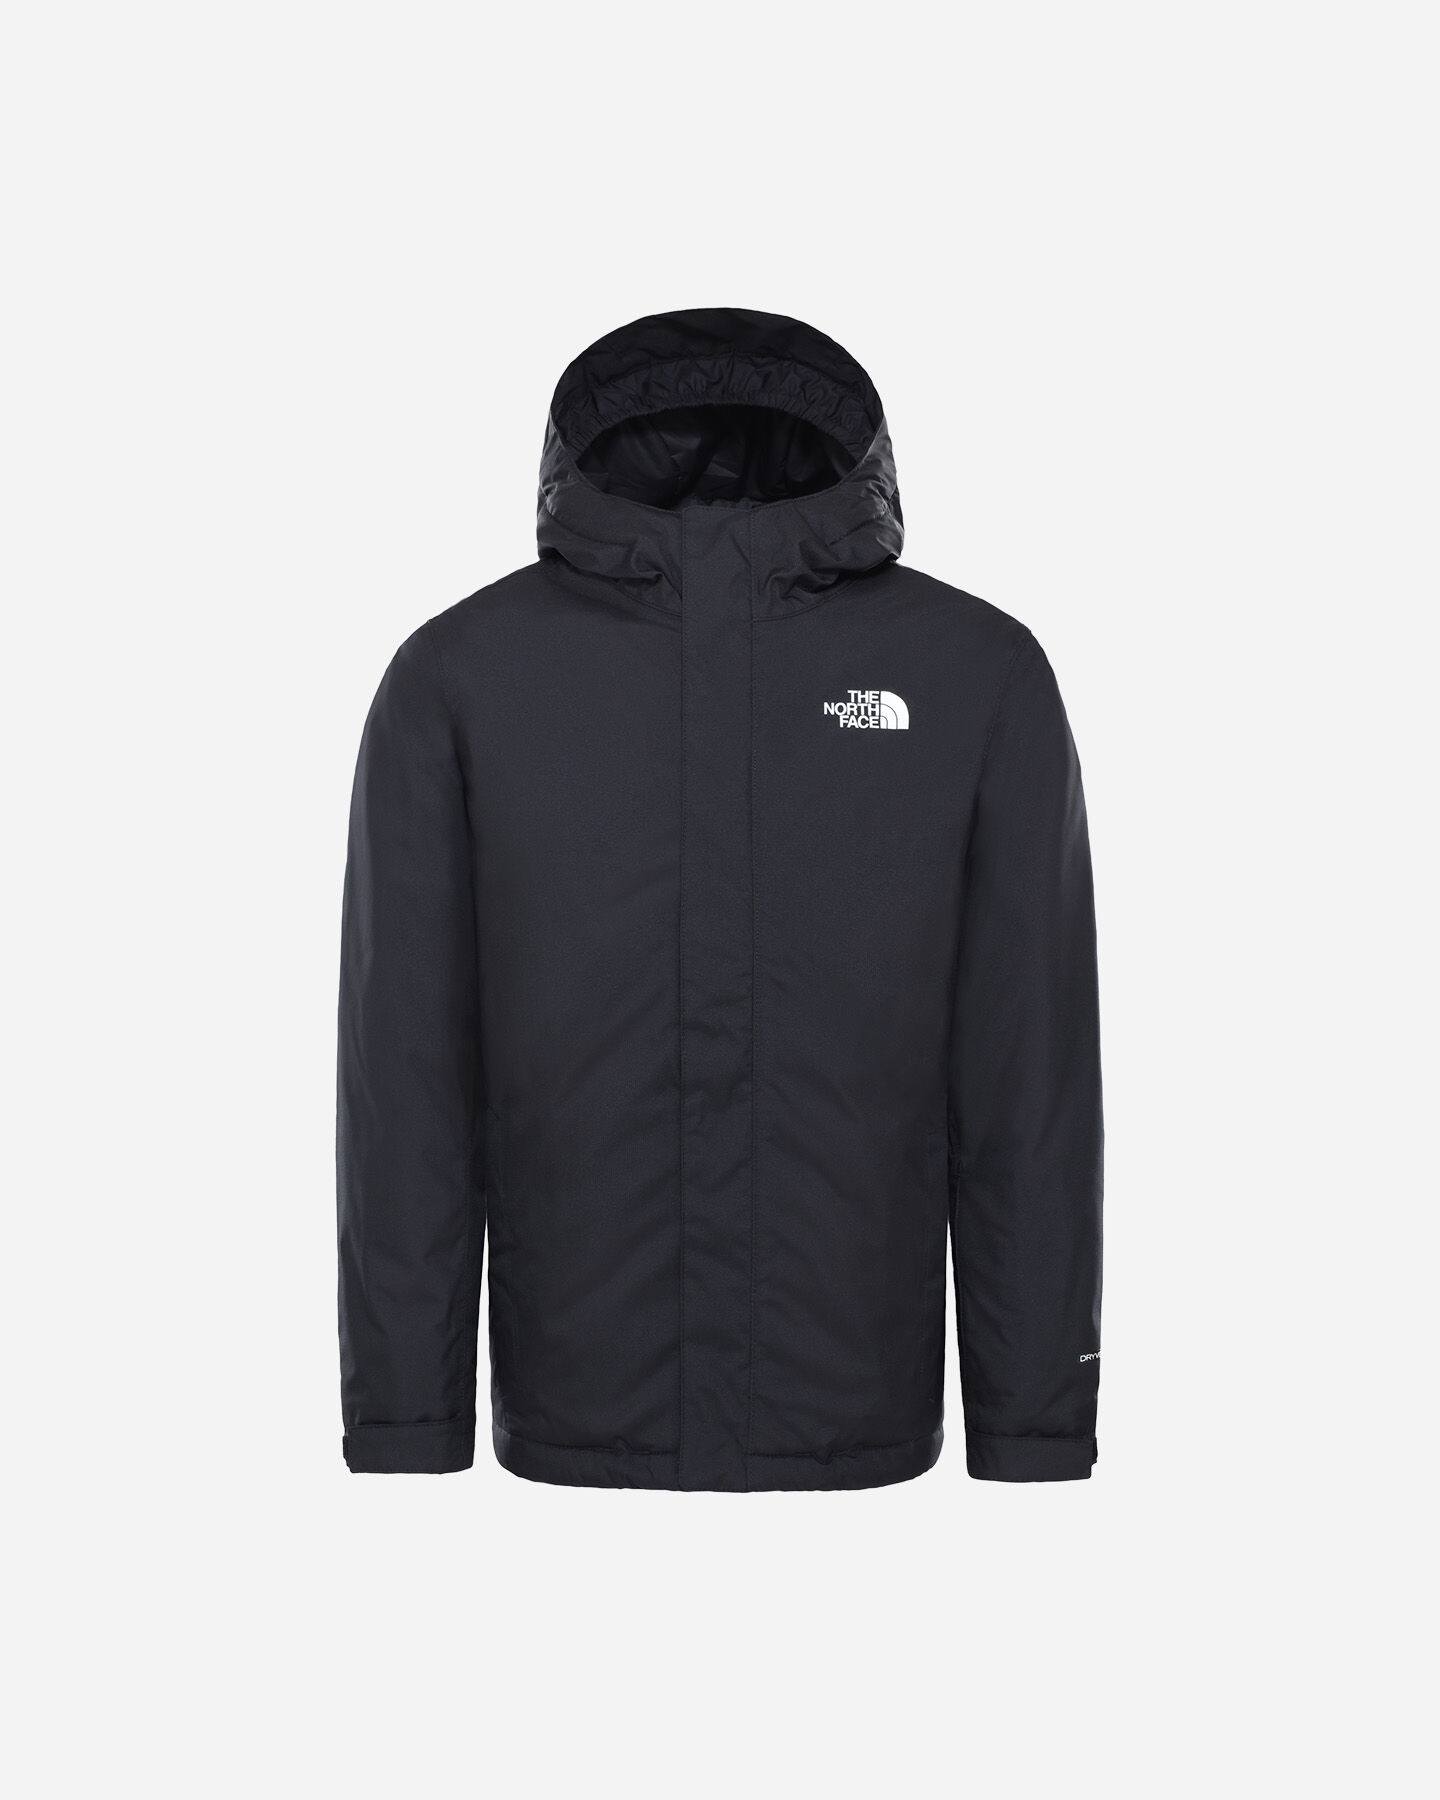  Giubbotto THE NORTH FACE SNOWQUEST DRYVENT JR S5241488|KY4|XS scatto 0